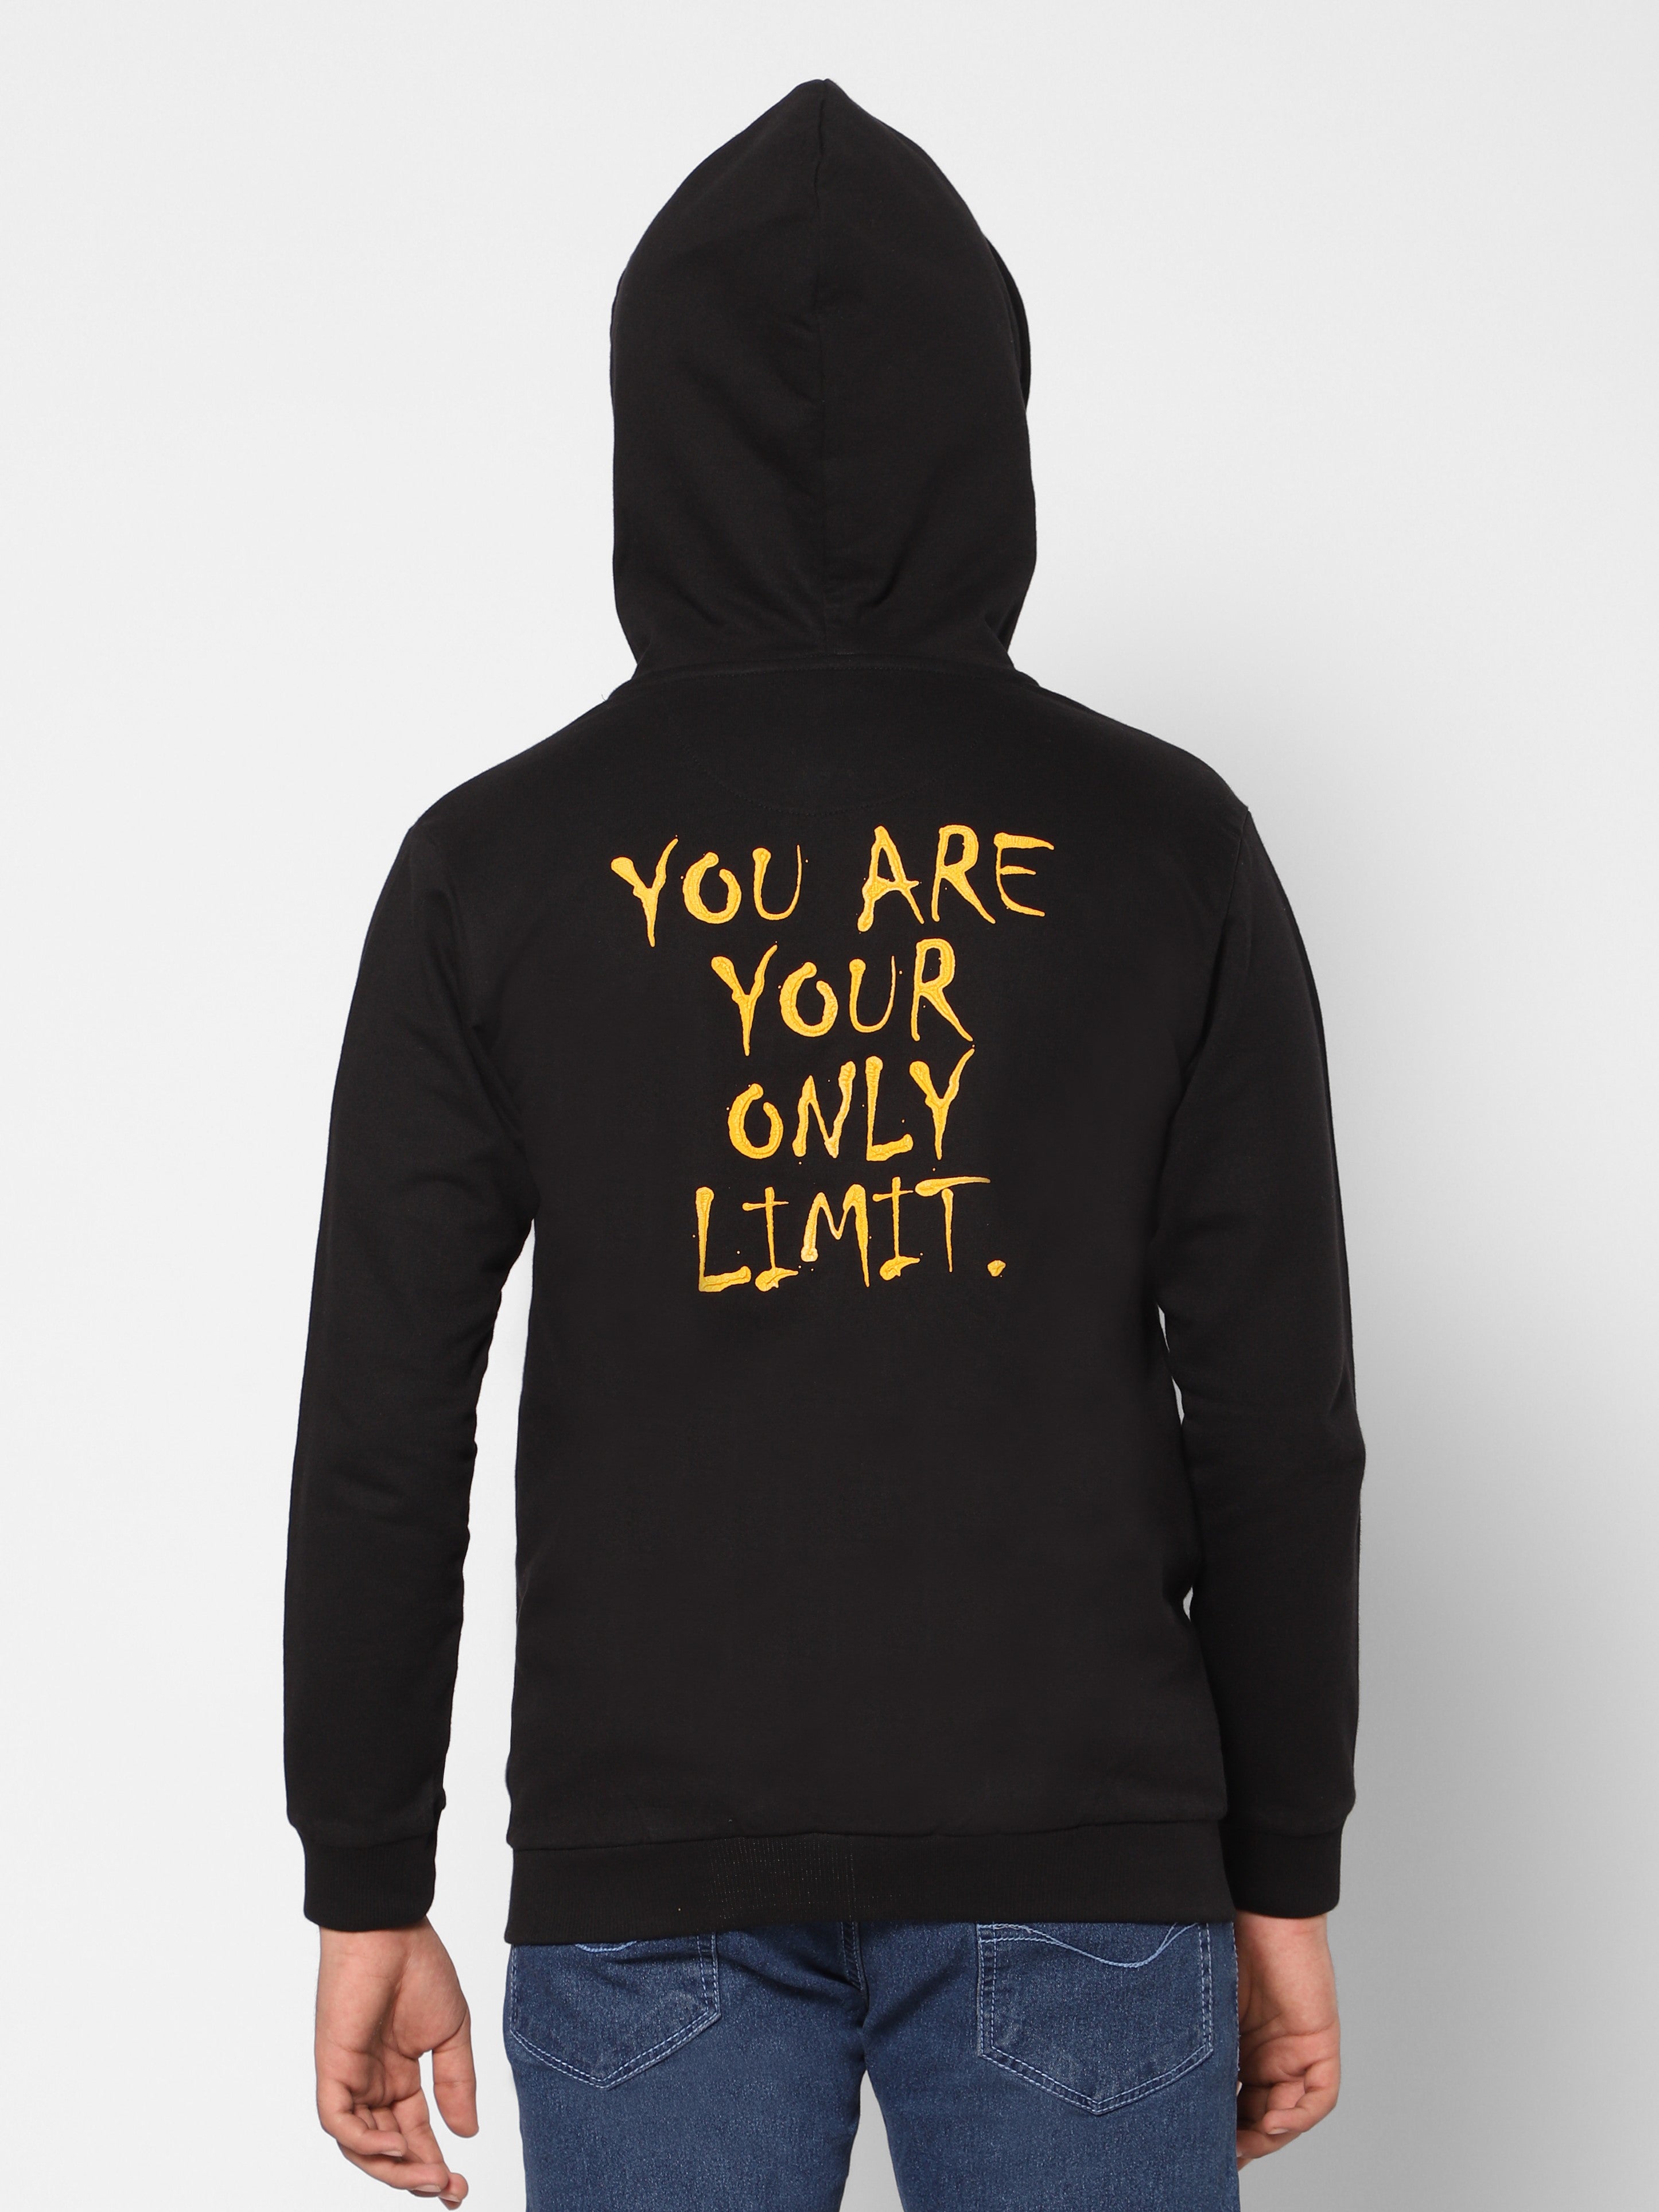 TeenTrums Unisex Sweatshirt - you are your only limit puff print - Black